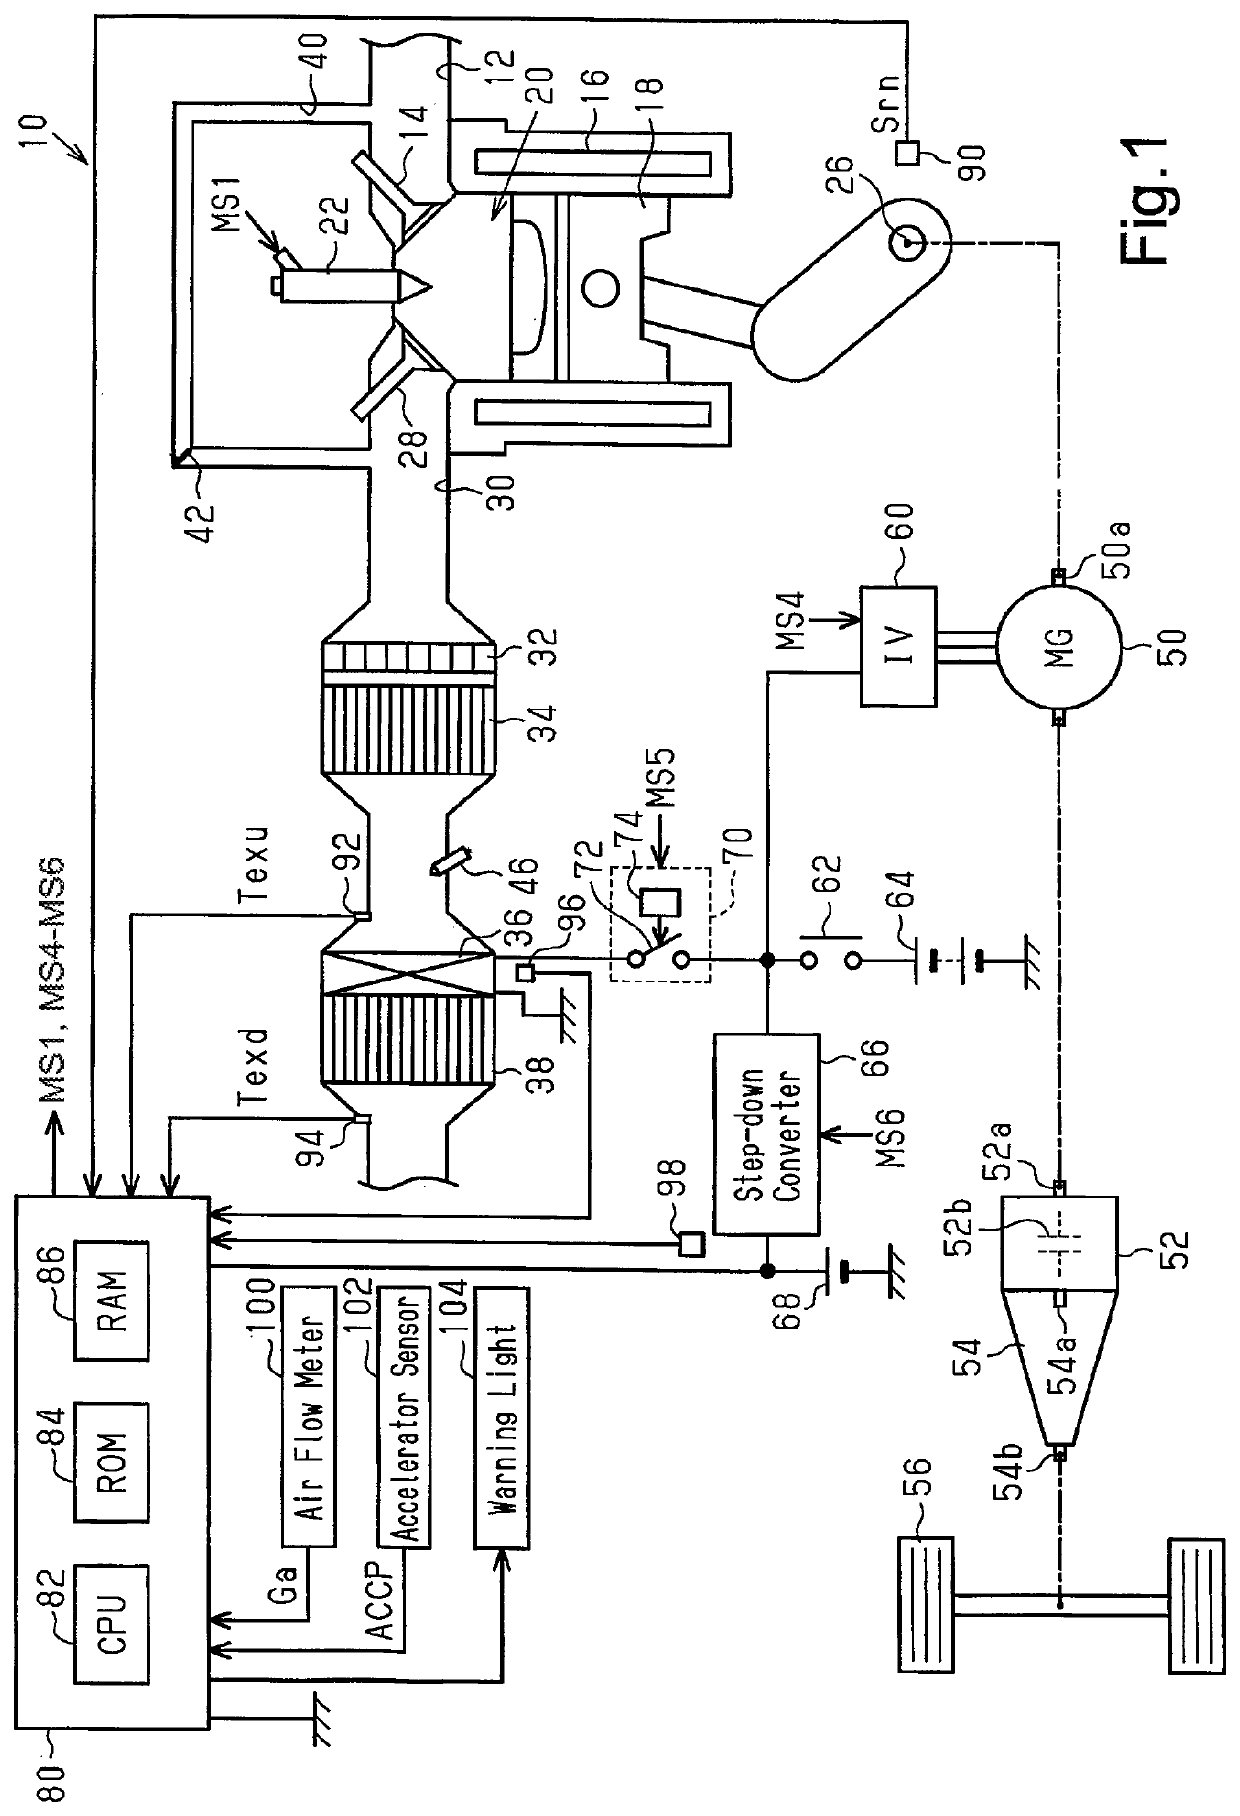 Vehicle controller configured to execute a duty cycle control process when determining that an anomaly has occurred